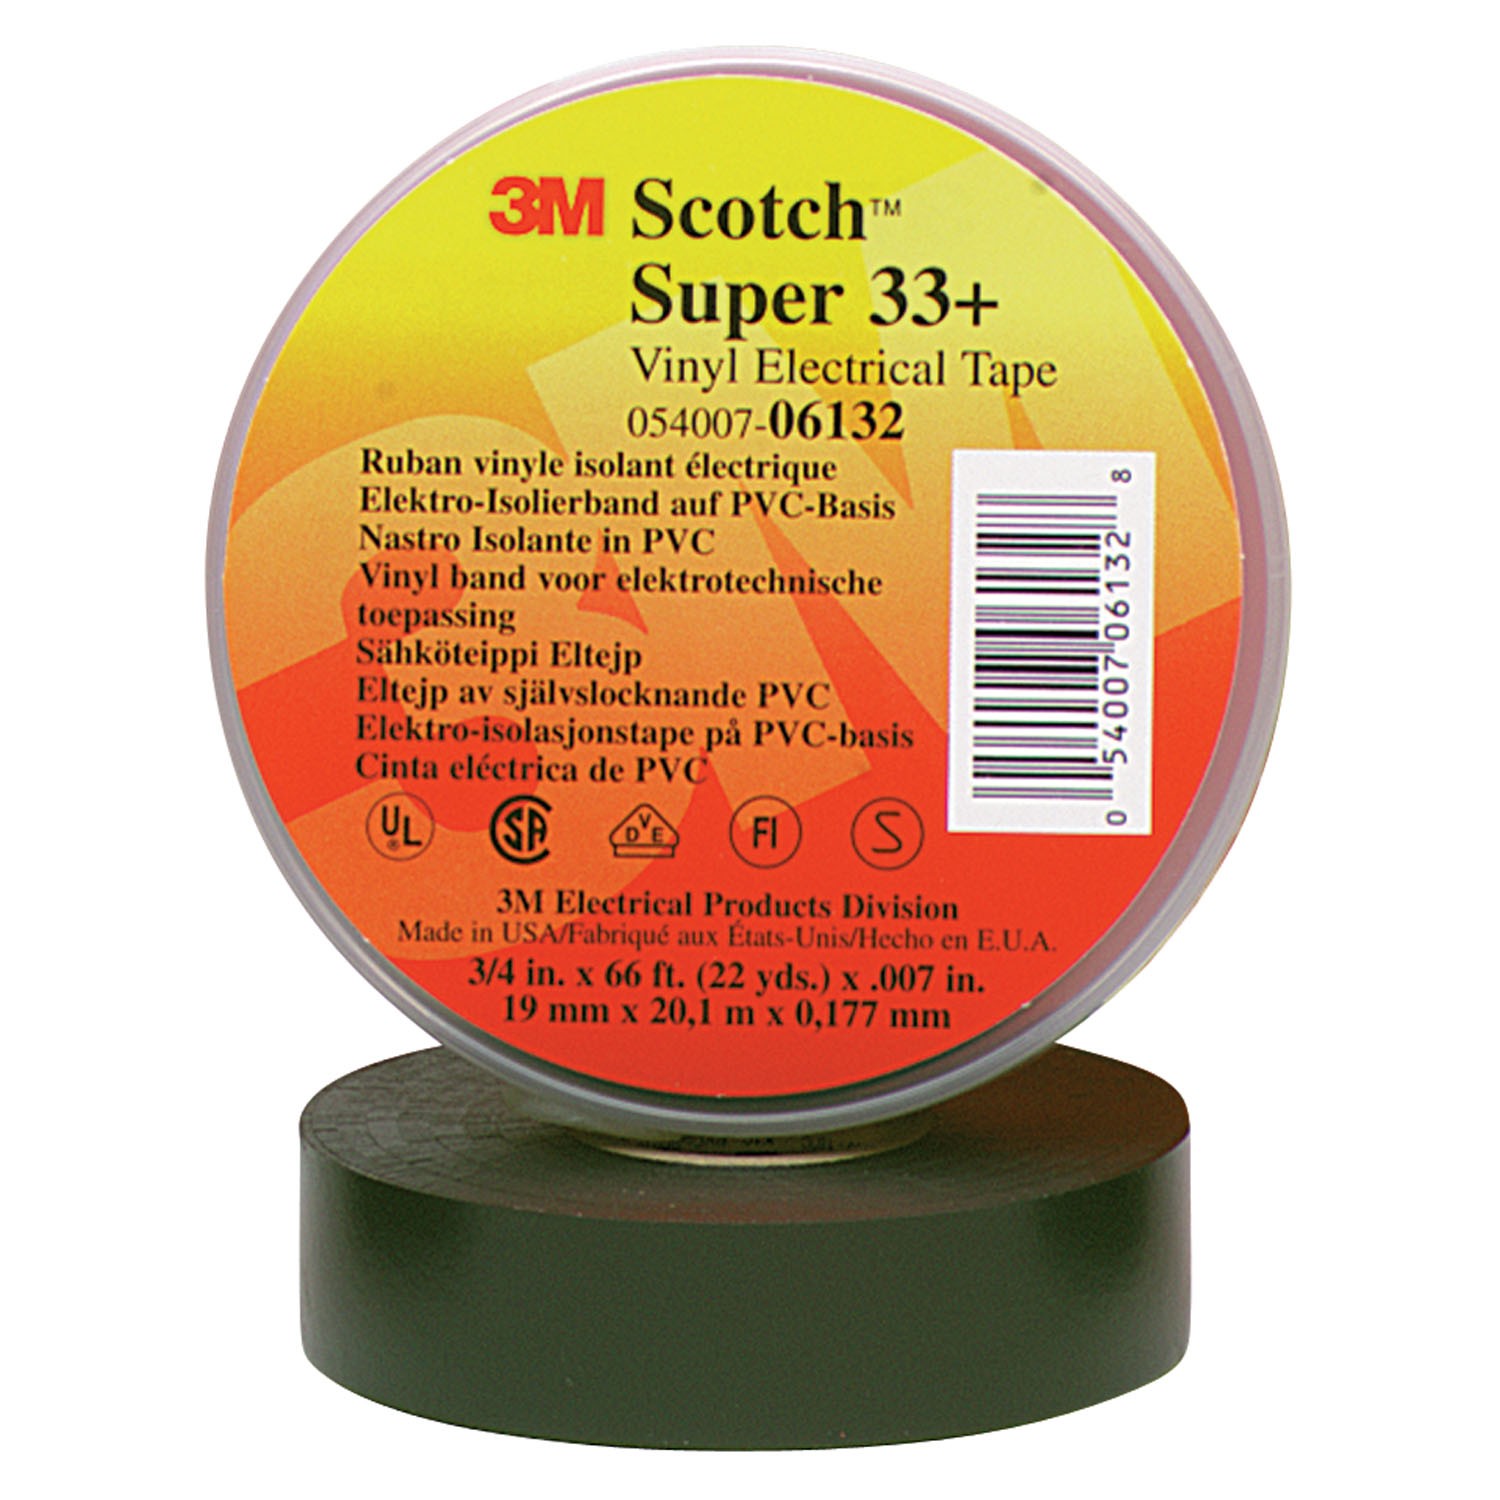 1/4" 3M Scotch Super 33+ Vinyl Electrical Tape with Non-Thermosetting Rubber Adhesive, black, 1/4" wide x  36 YD roll